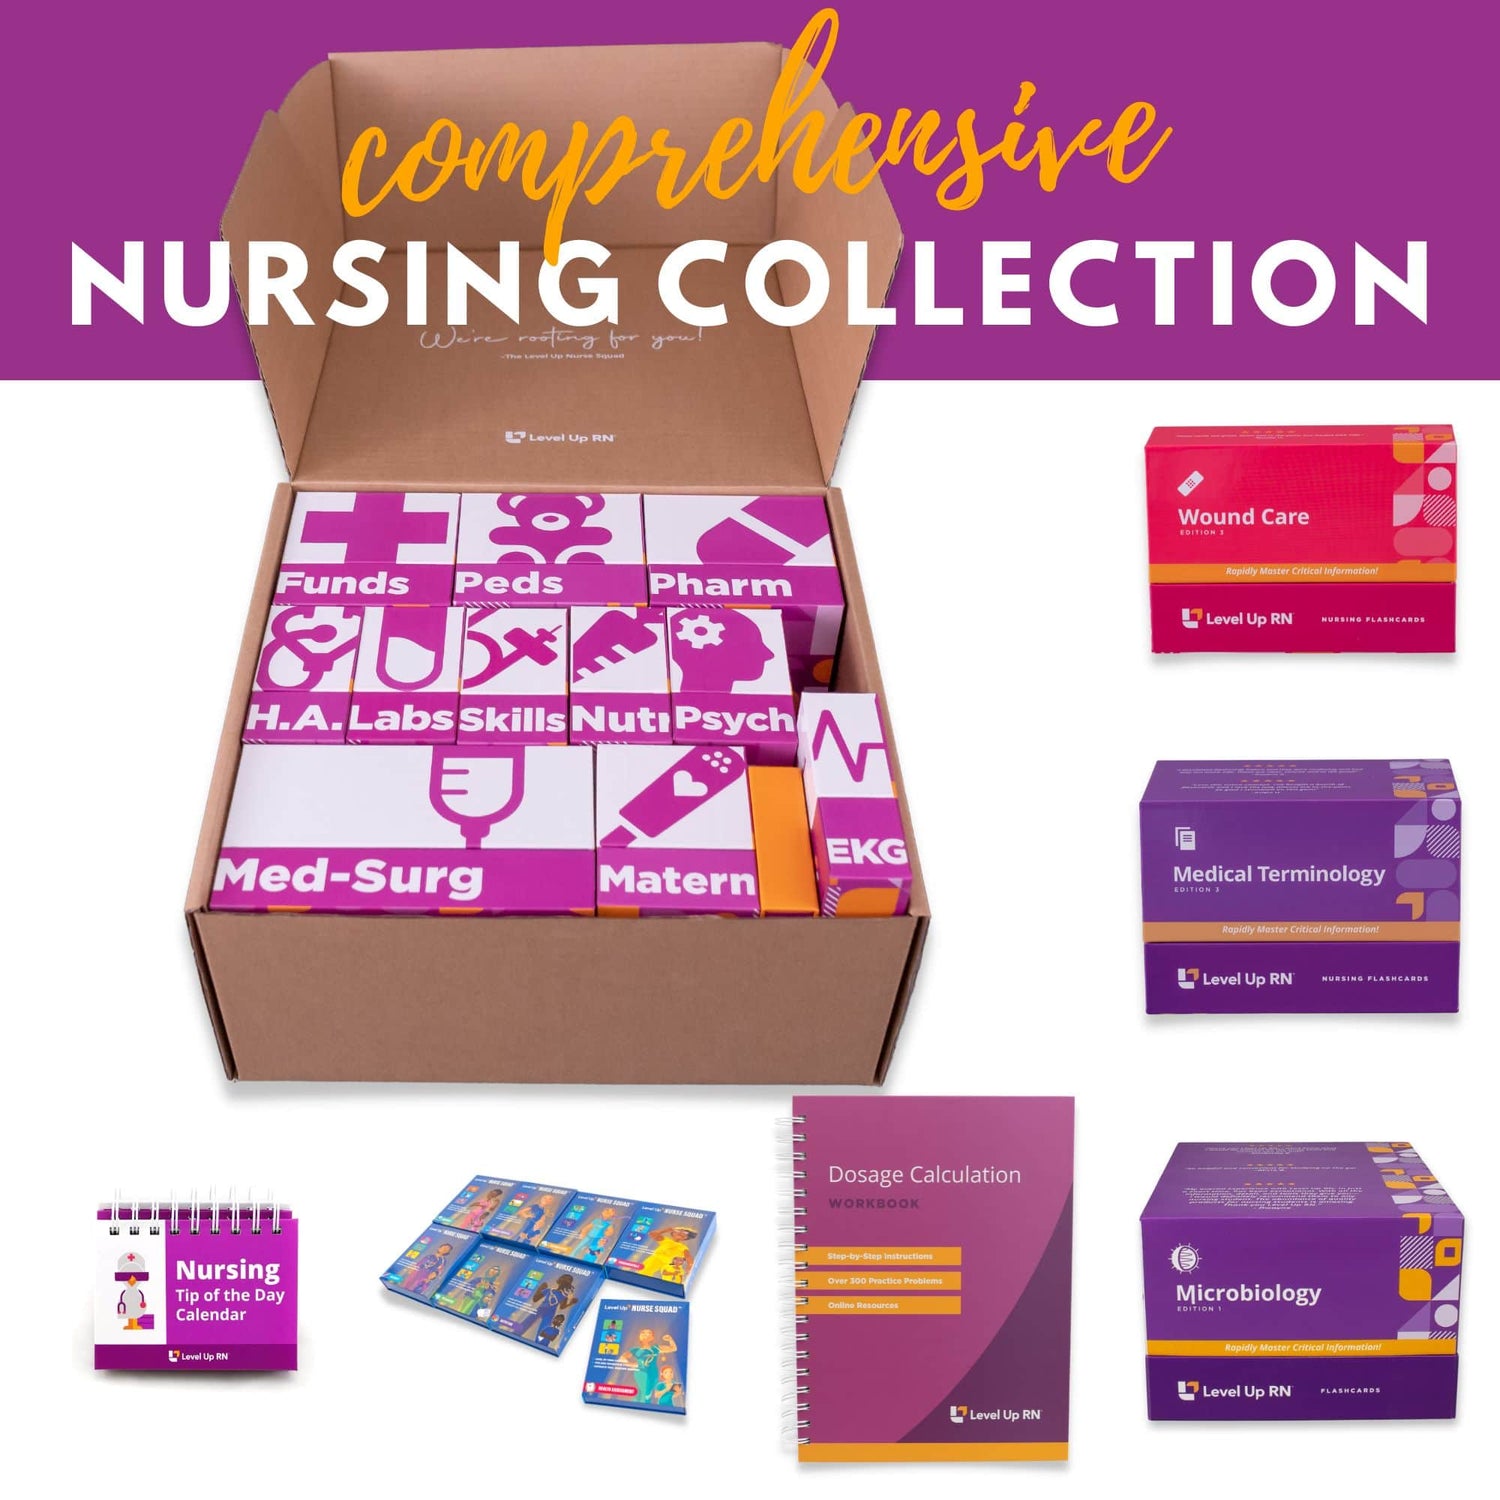 all products view of The Comprehensive Nursing Collection